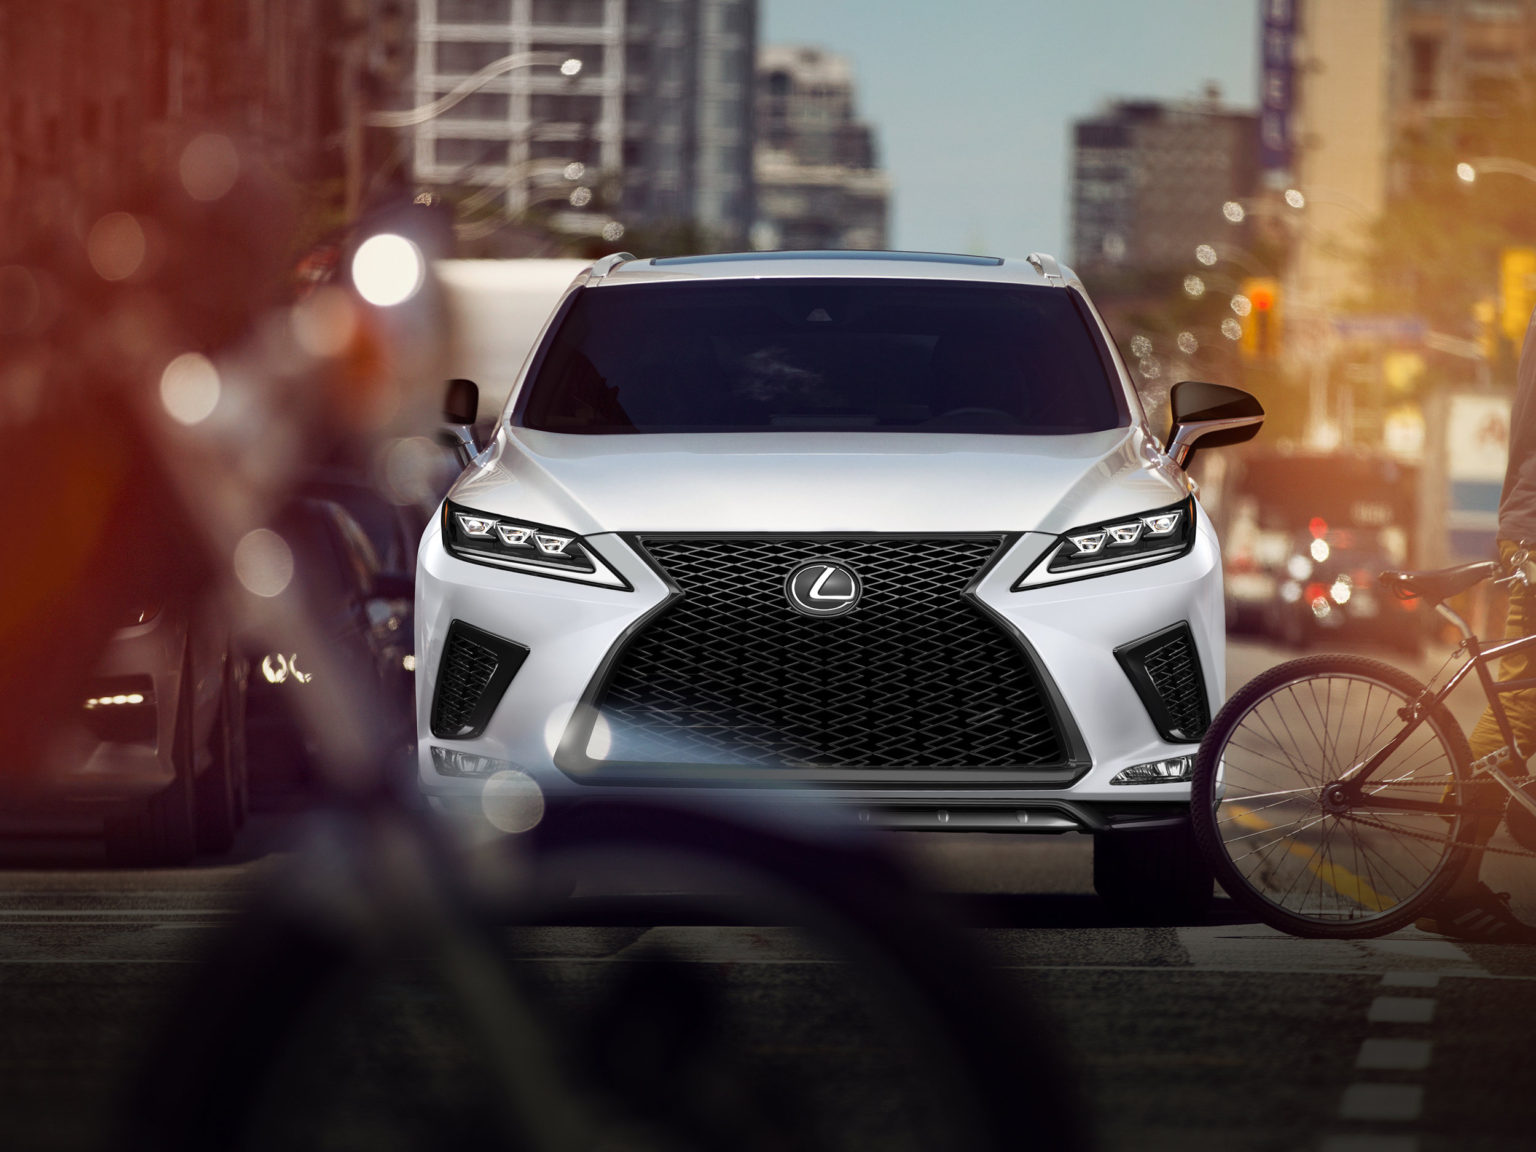 Lexus has once again placed atop the U.S. News & World Report Best Certified Pre-Owned Program rankings.